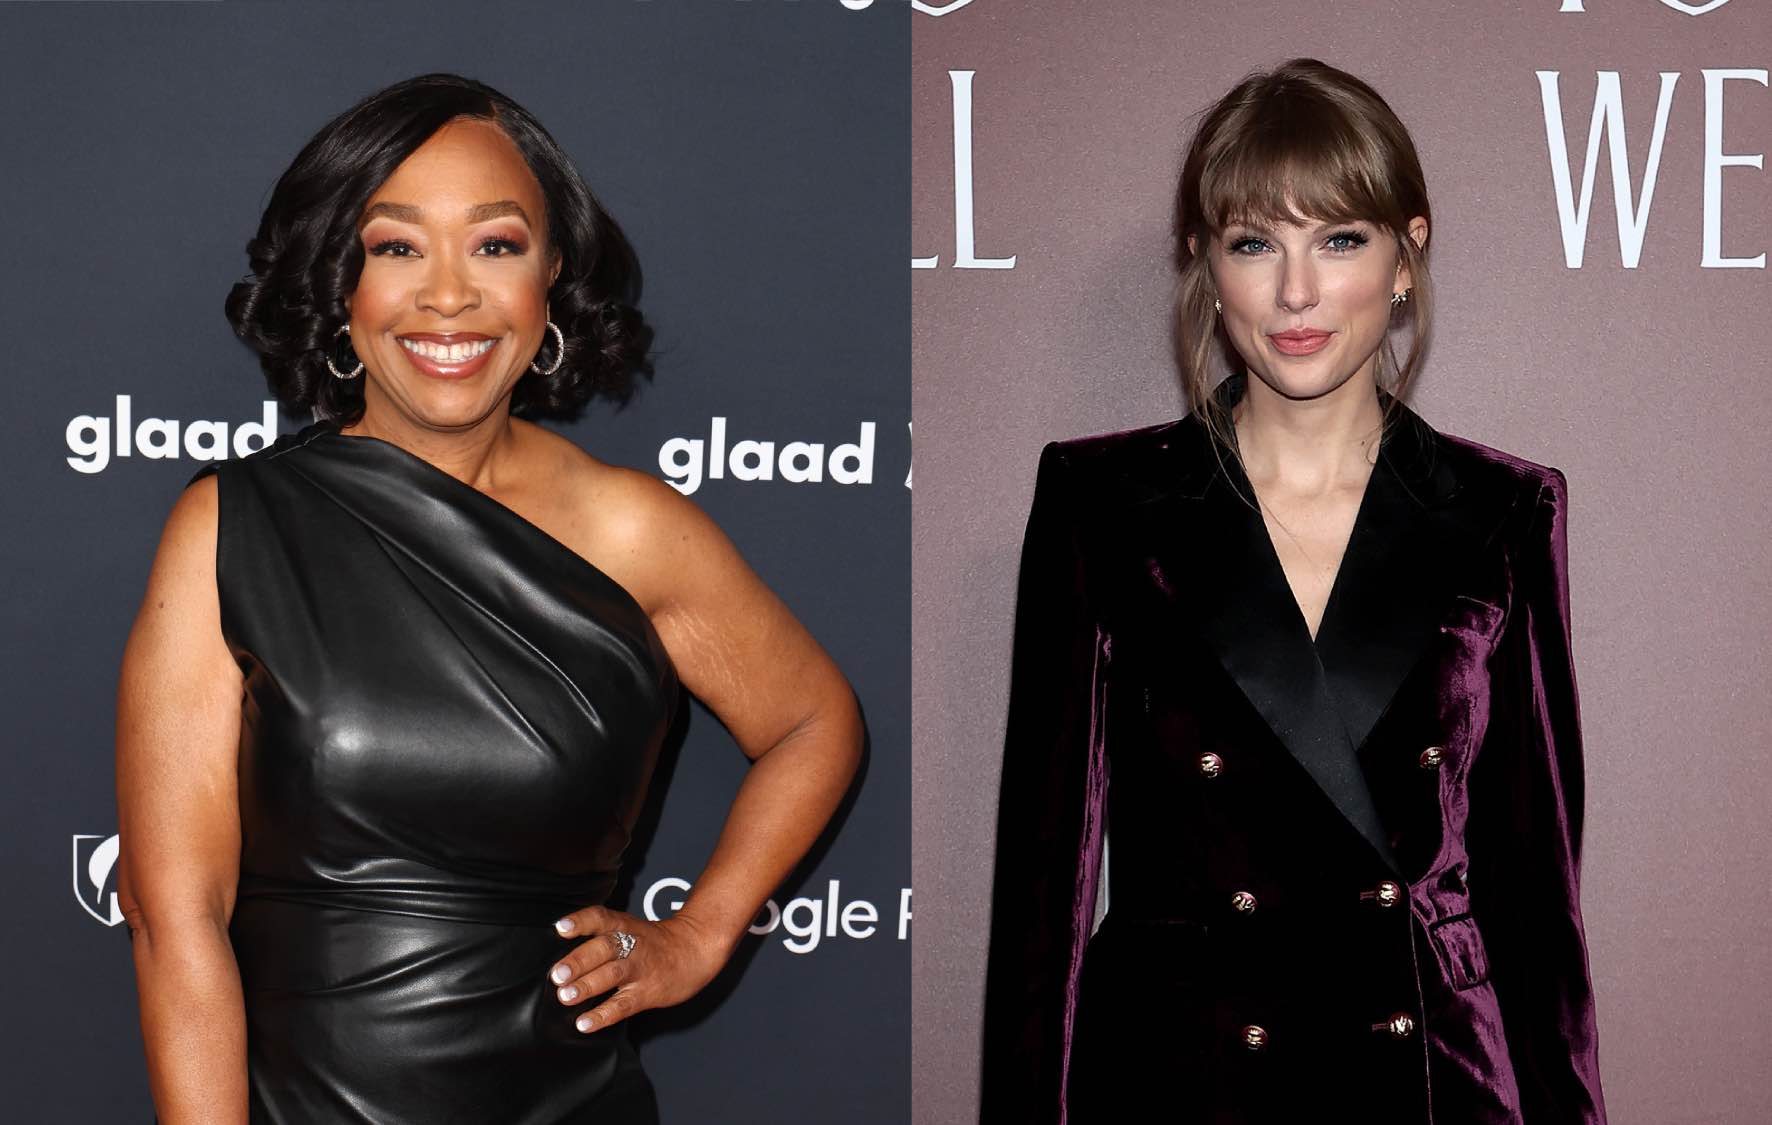 Taylor Swift performed barefoot in Shonda Rhimes’ office before ‘Grey’s Anatomy’ sync